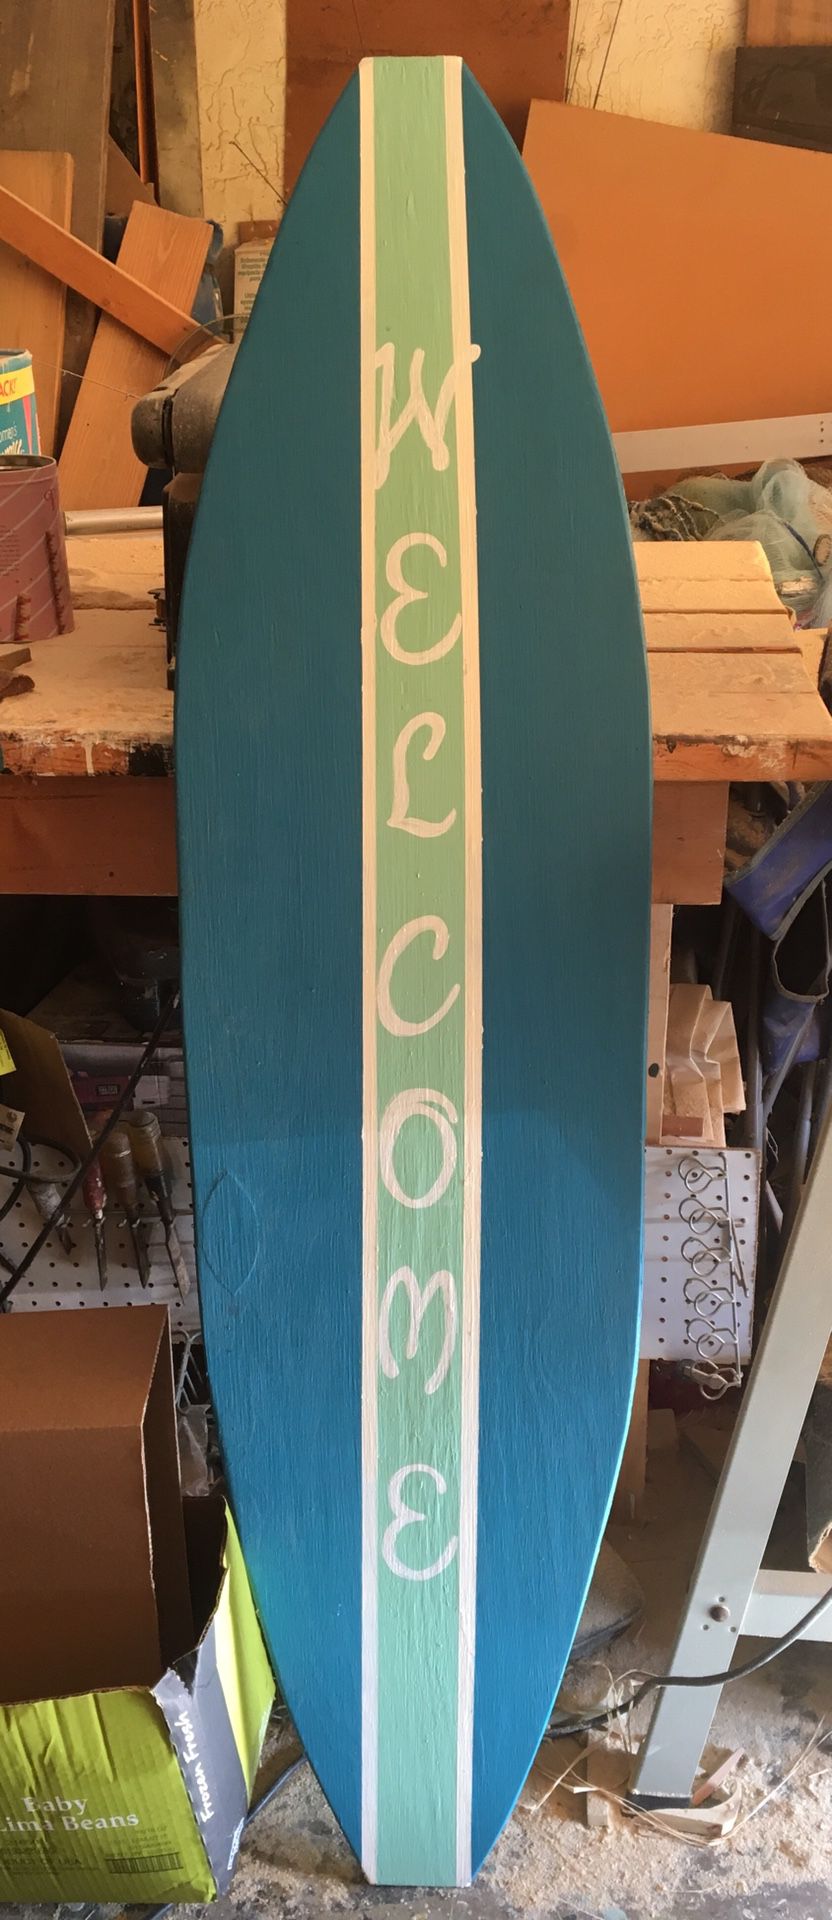 Solid wood welcome surfboard